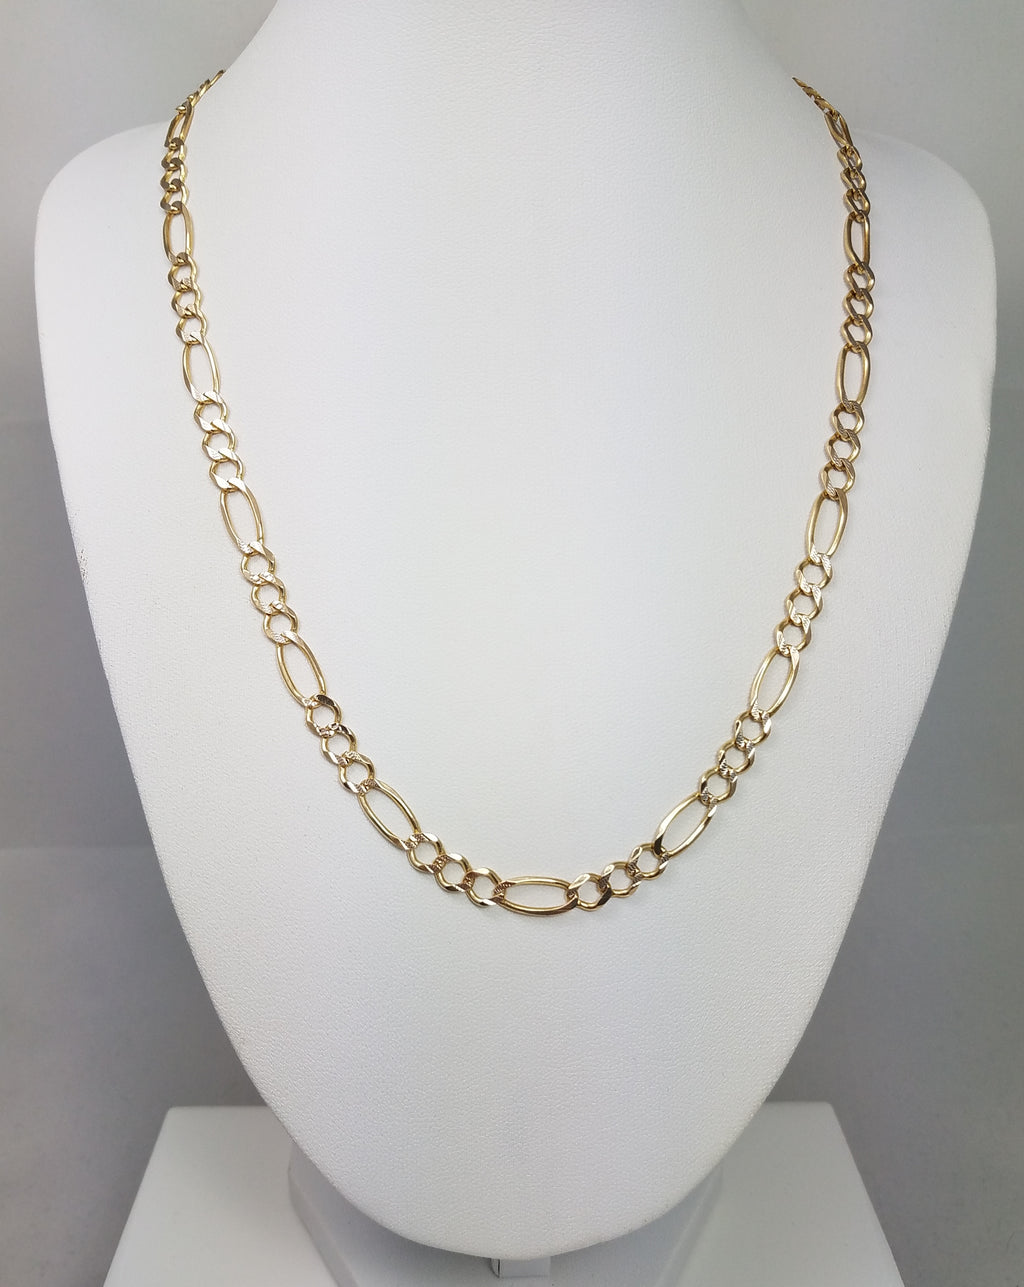 19" 14k Solid Two Tone Gold Diamond Cut Figaro Chain Necklace